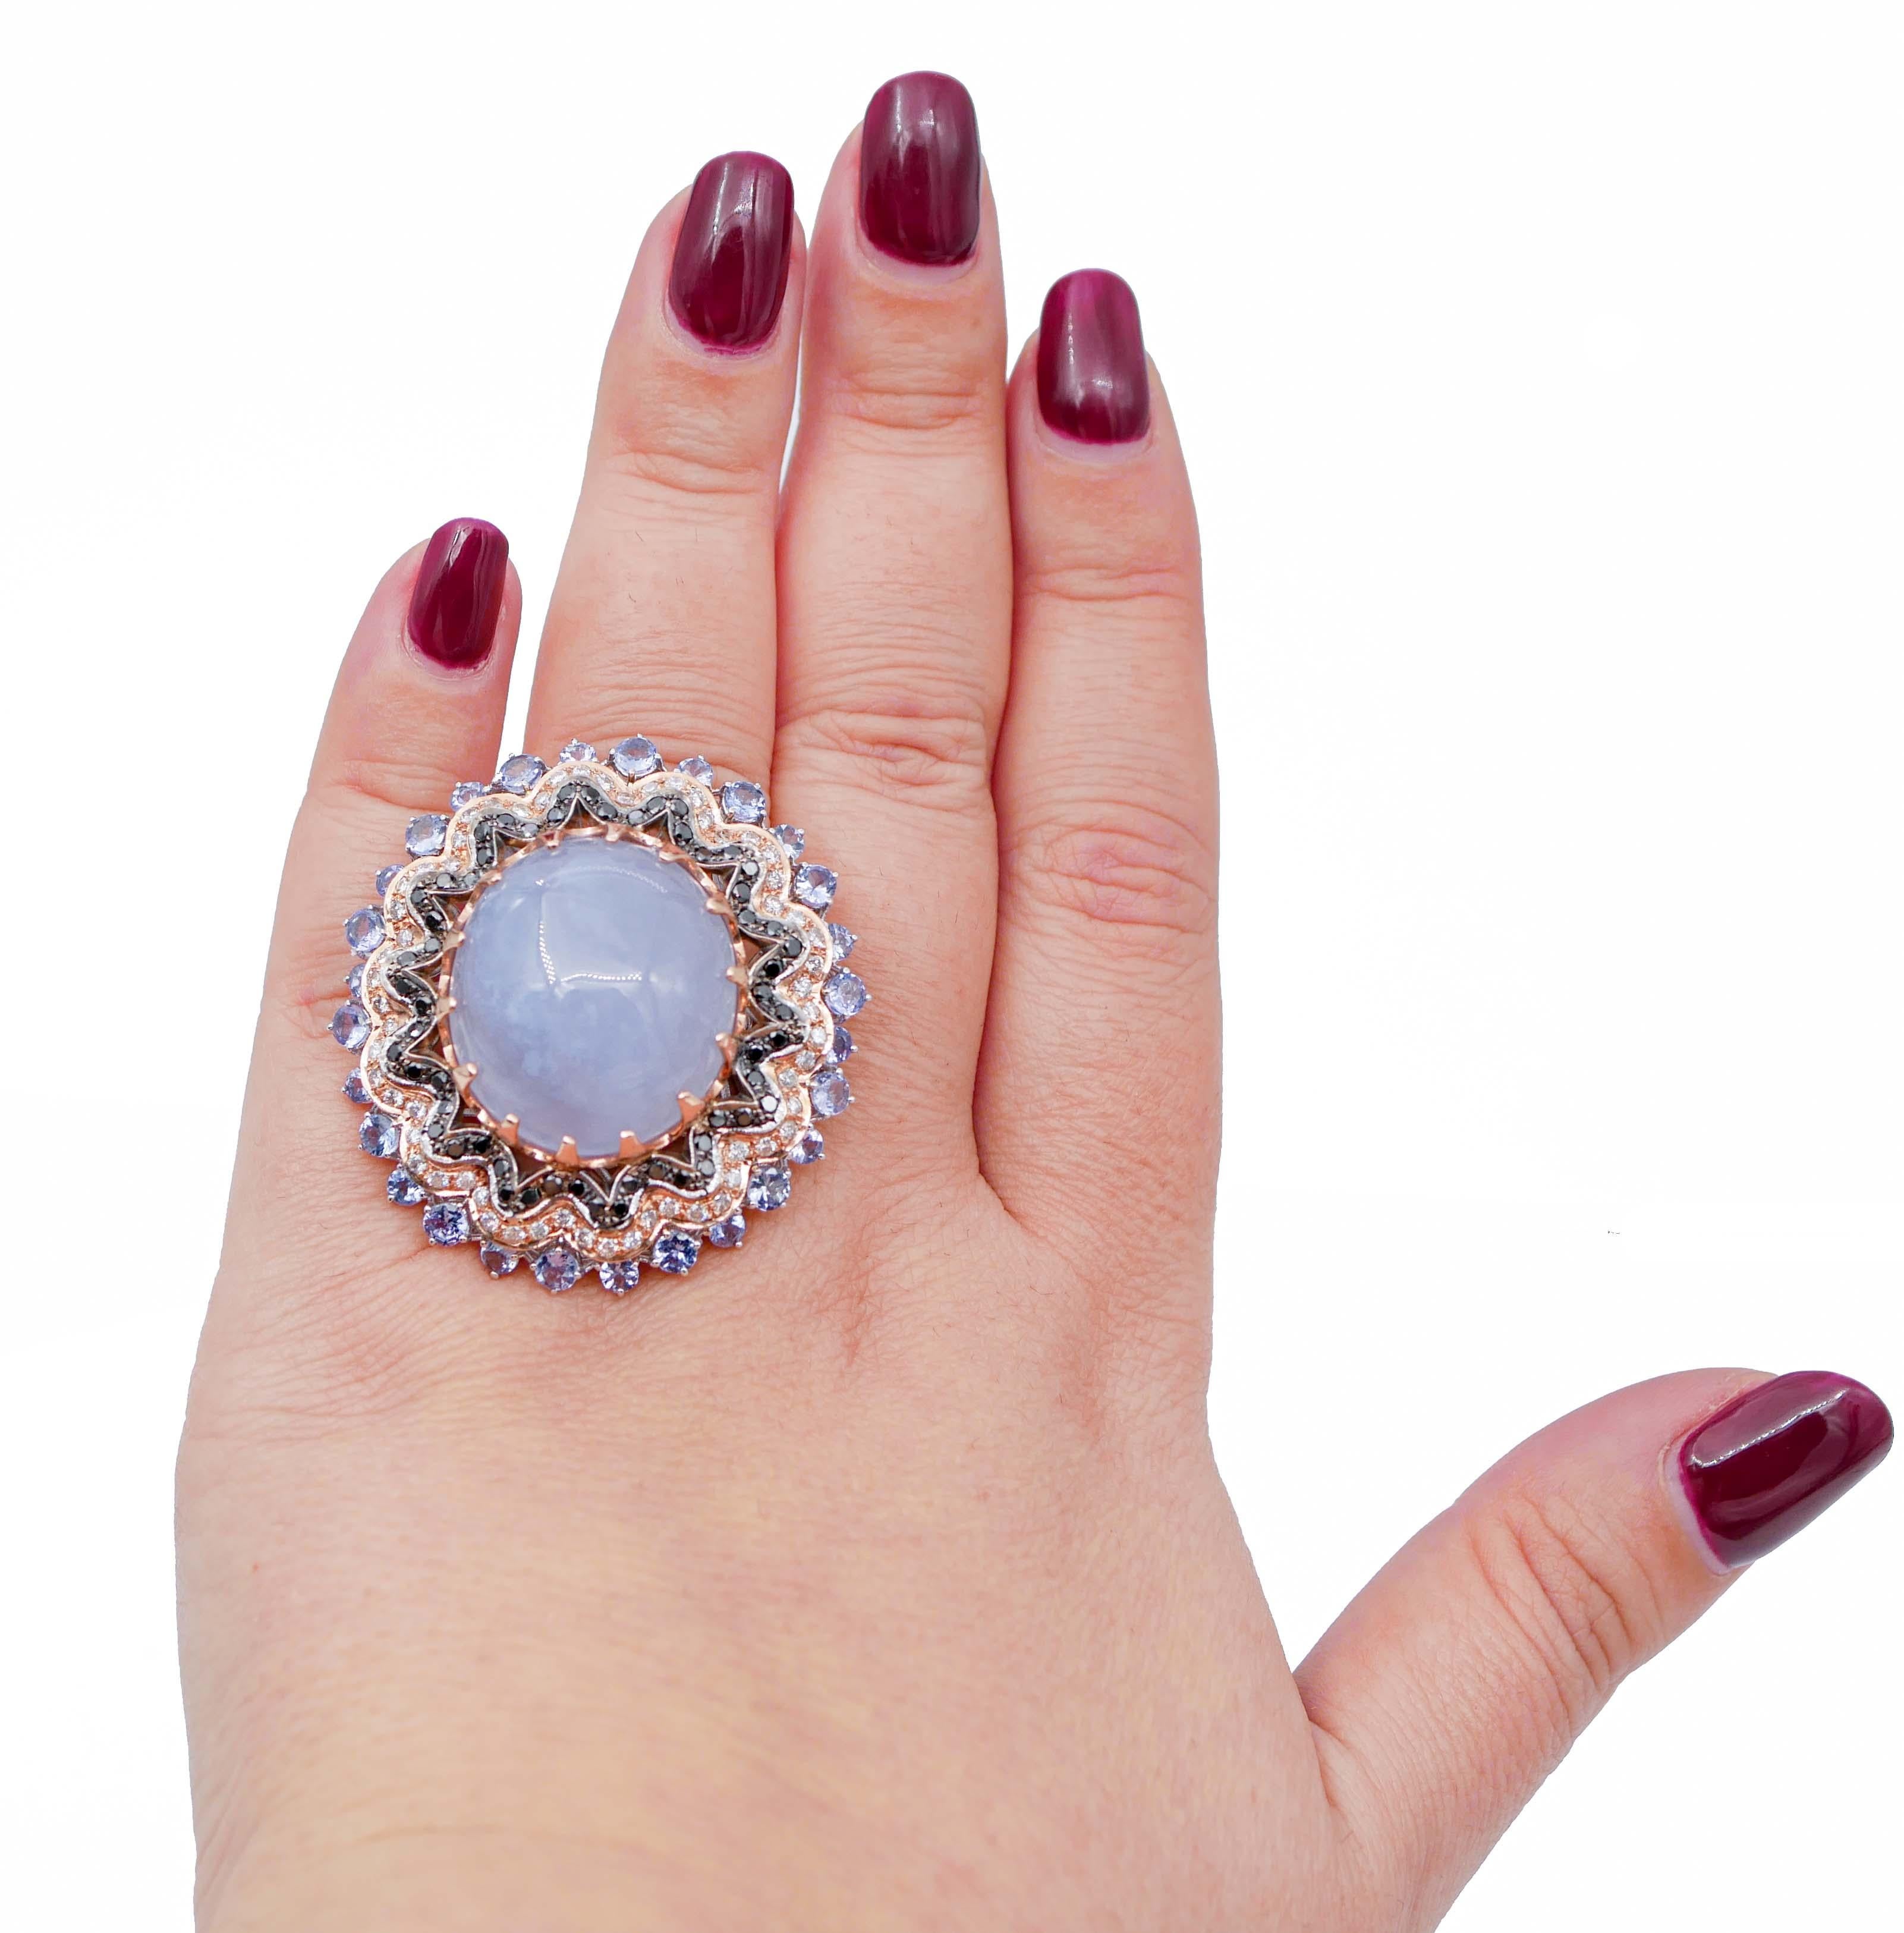 Mixed Cut Chalcedony, Tanzanite, Diamonds, 18 Karat White and Rose Gold Ring. For Sale